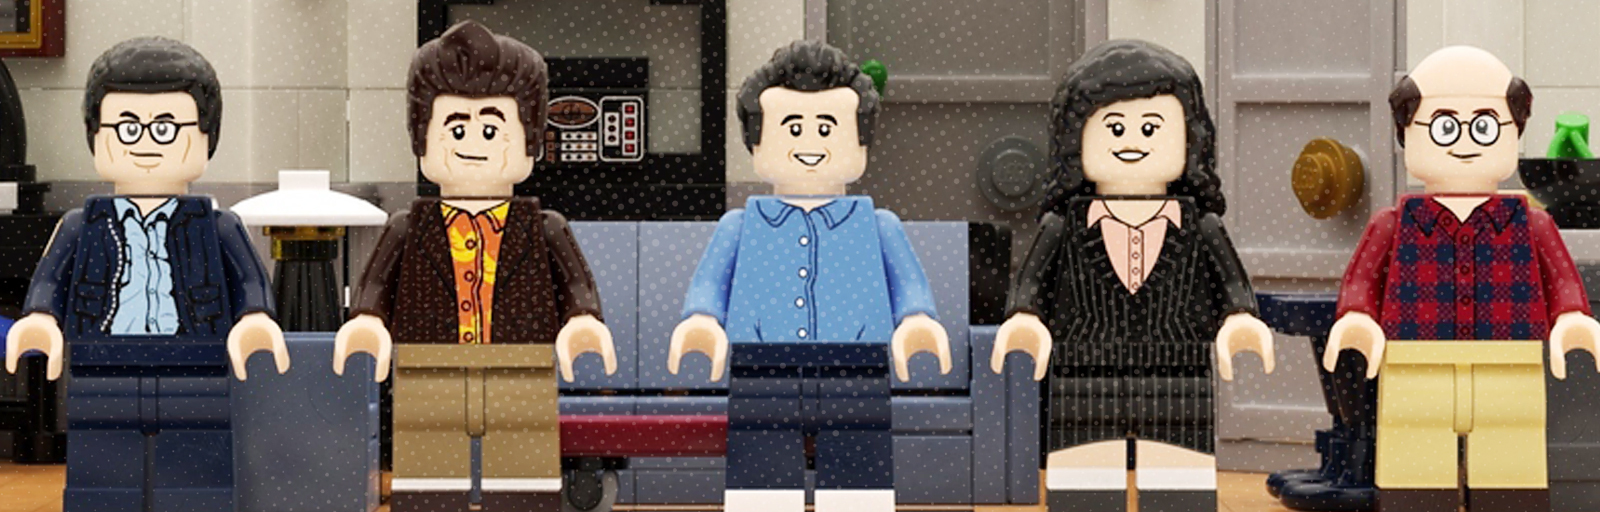 Where To Buy The Seinfeld LEGO Set